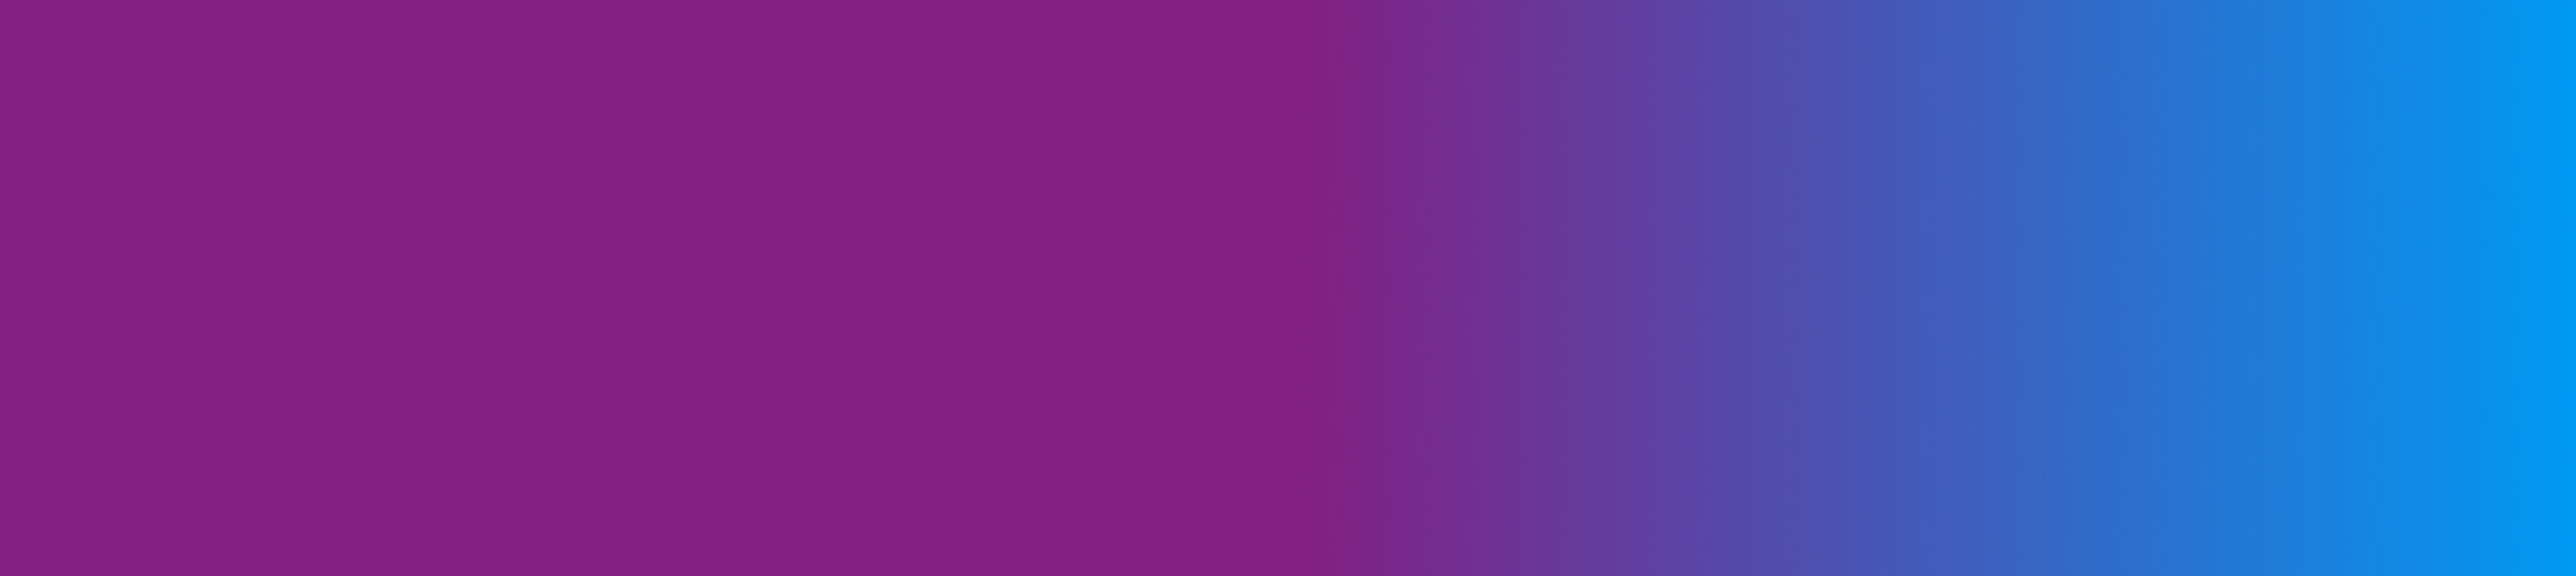 Abstract background with a smooth gradient transitioning from purple at the top to blue at the bottom.